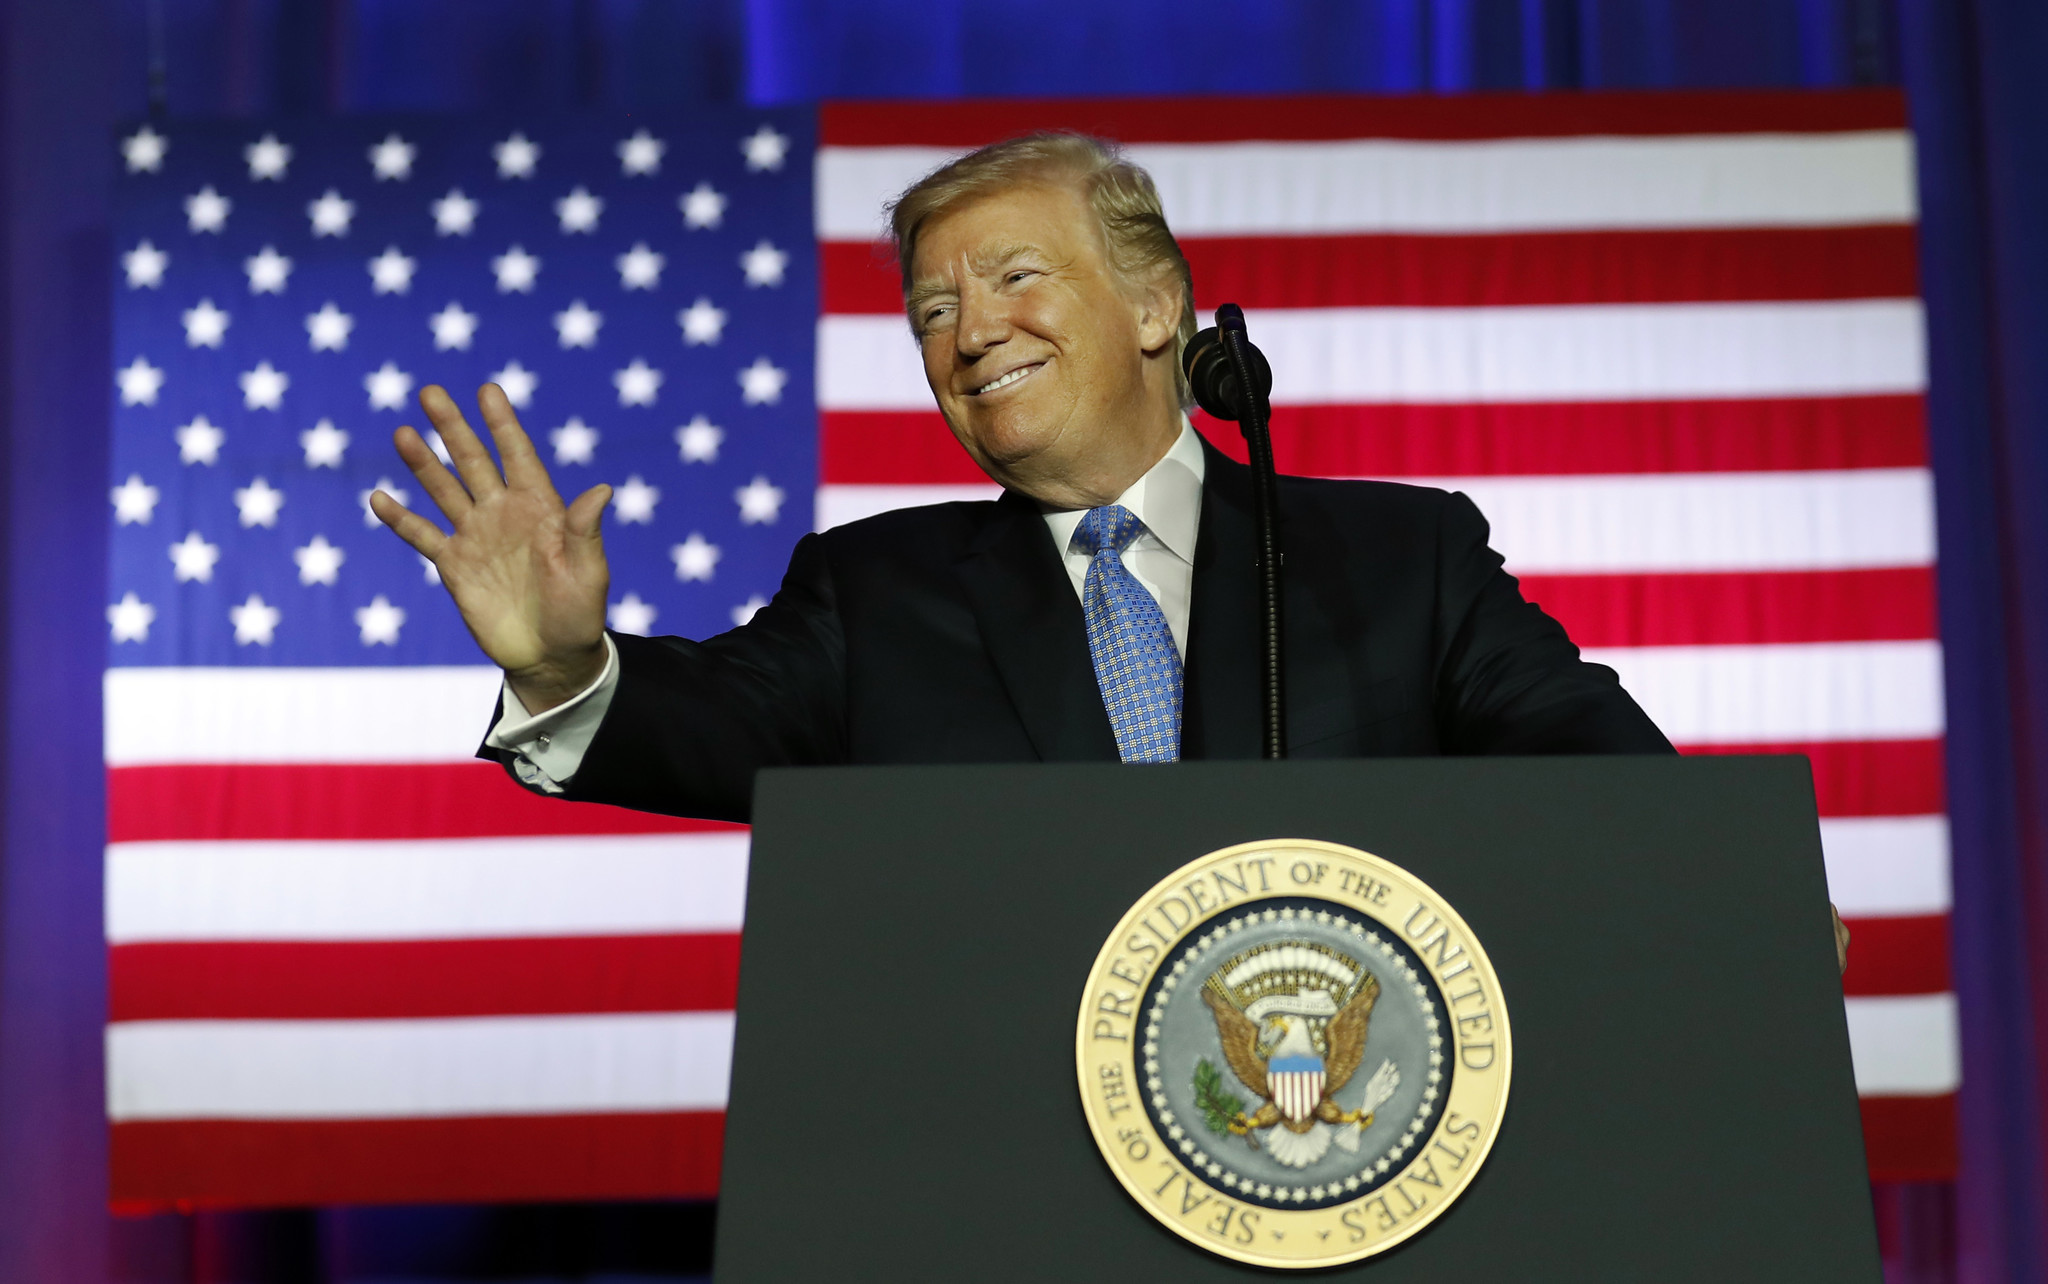 Donald Trump is on track to win again in 2020